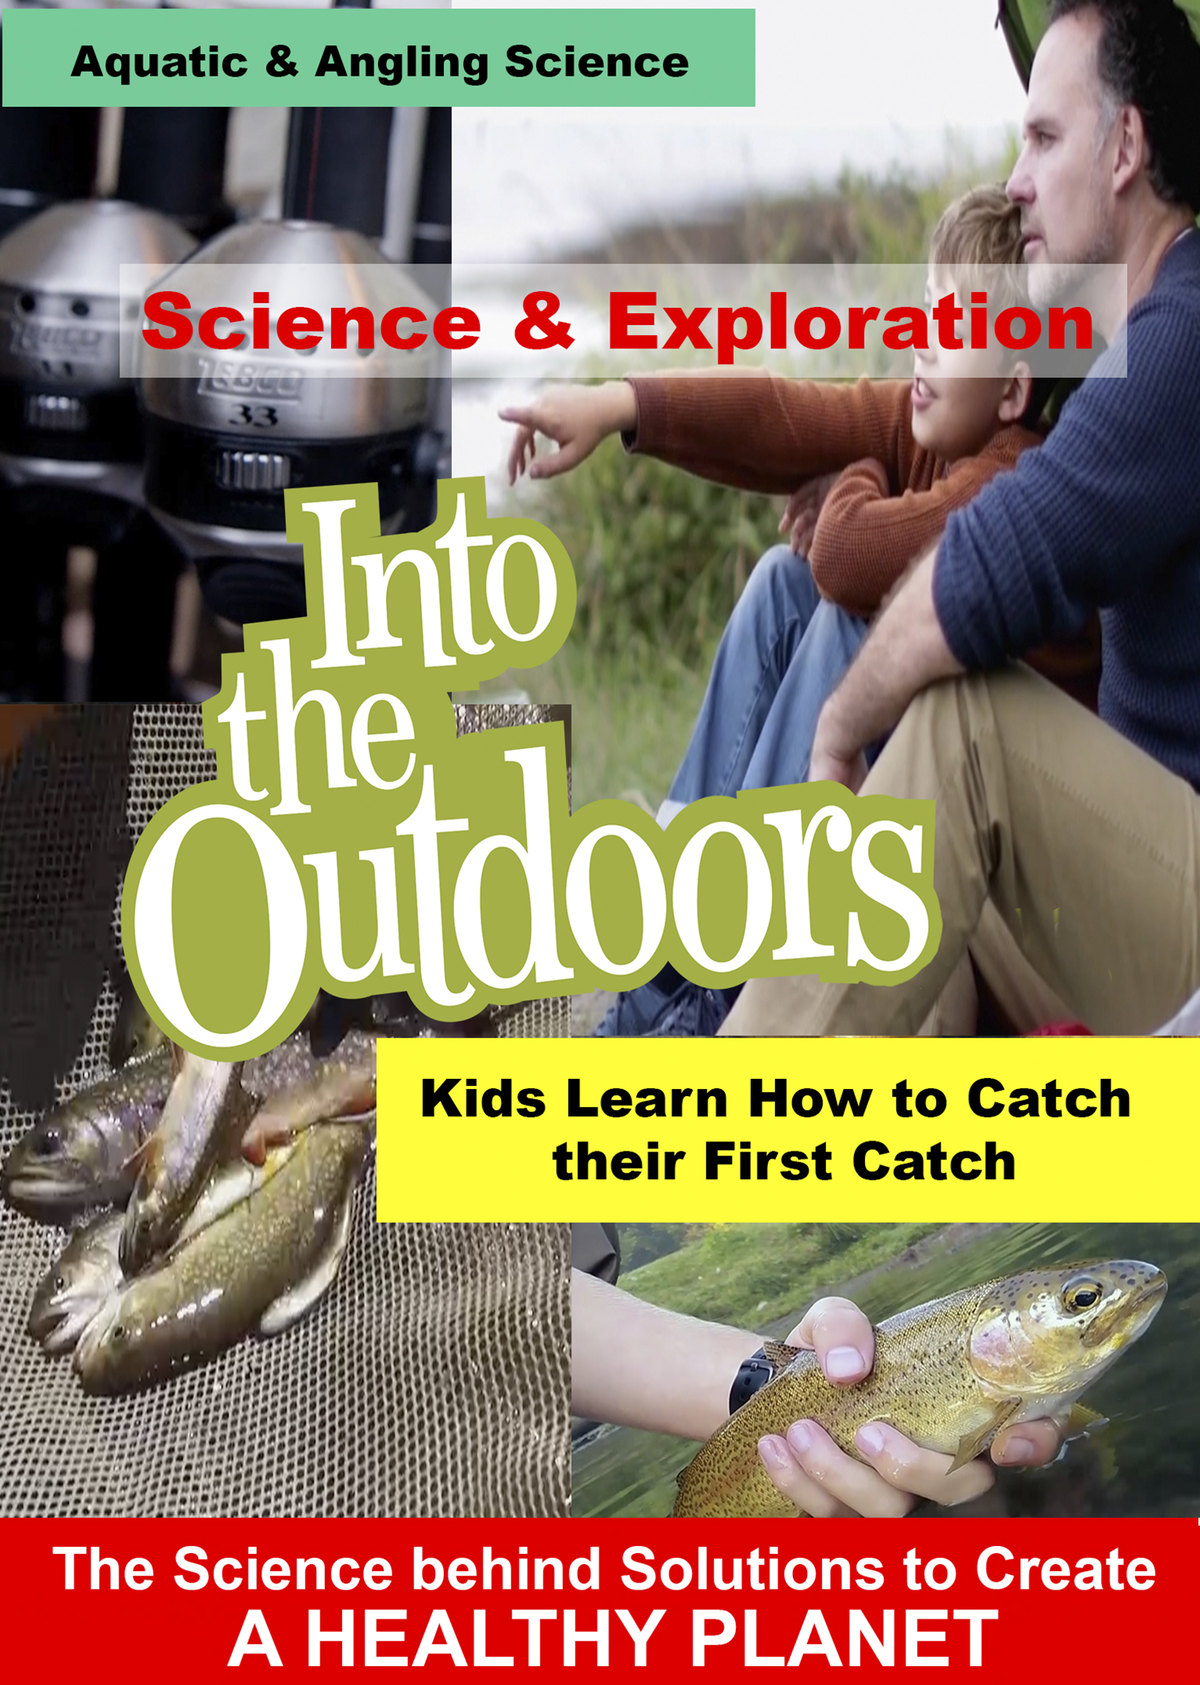 K5006 - Kids Learn How to Catch their First Catch